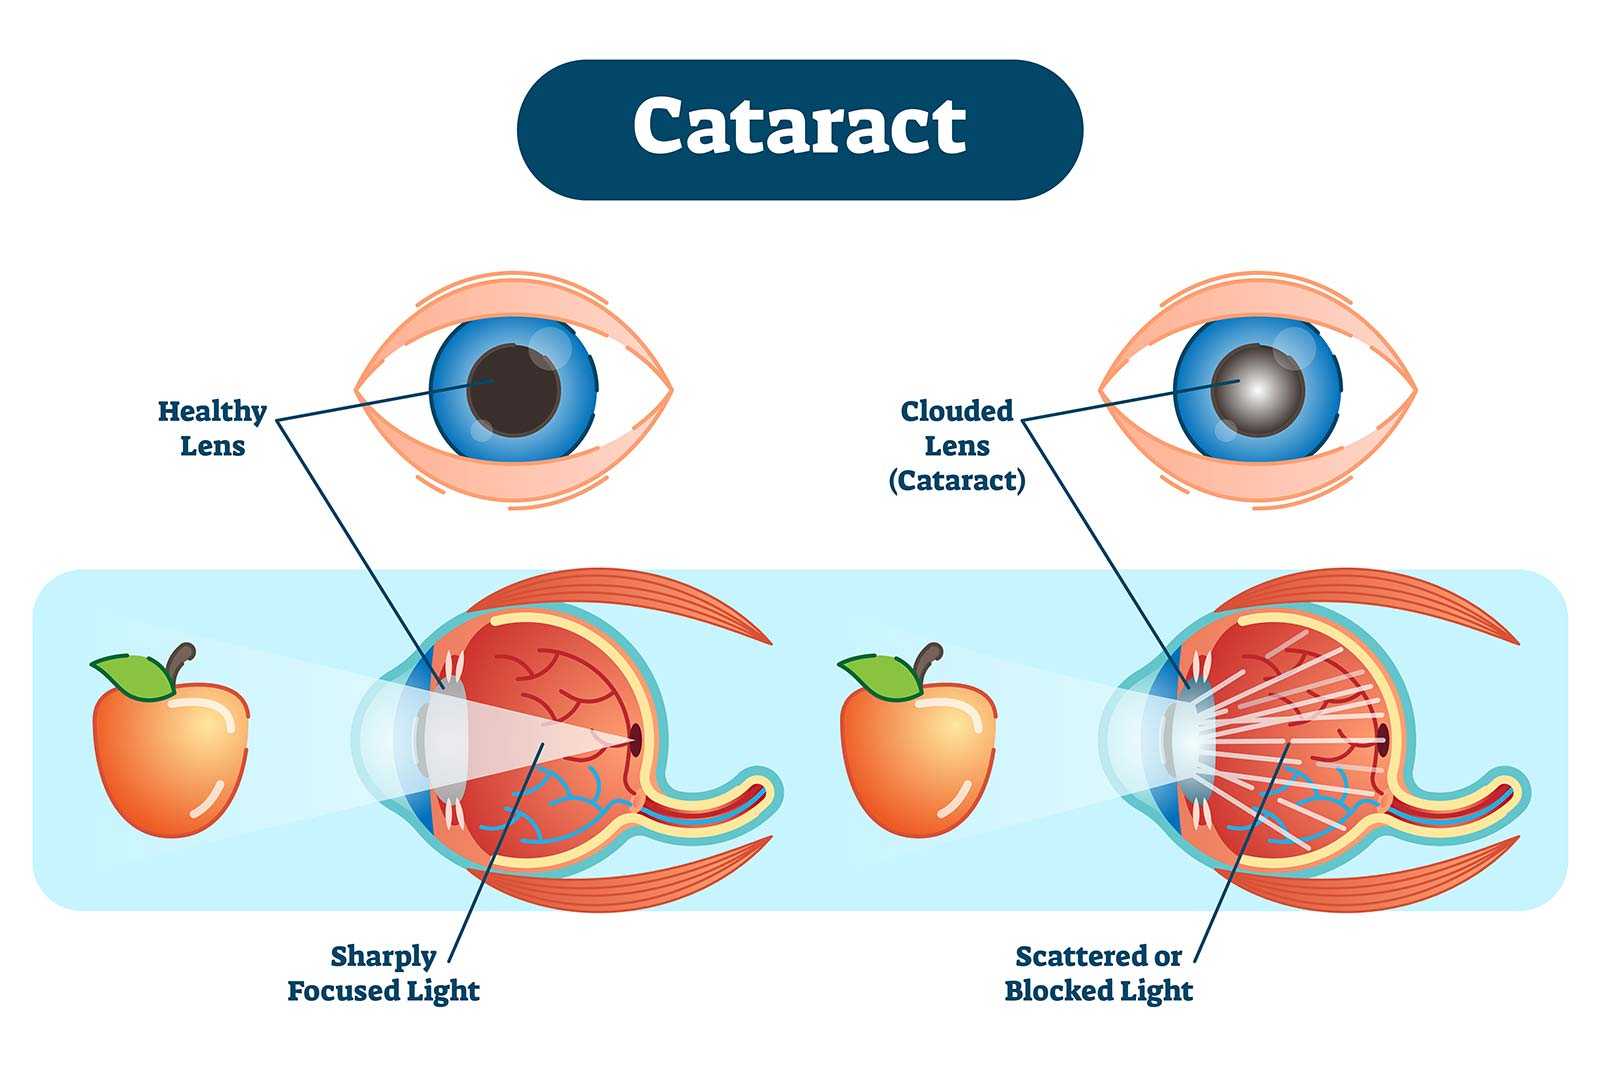 cataract-surgery-in-noida-cost-get-best-price-at-vision-plus